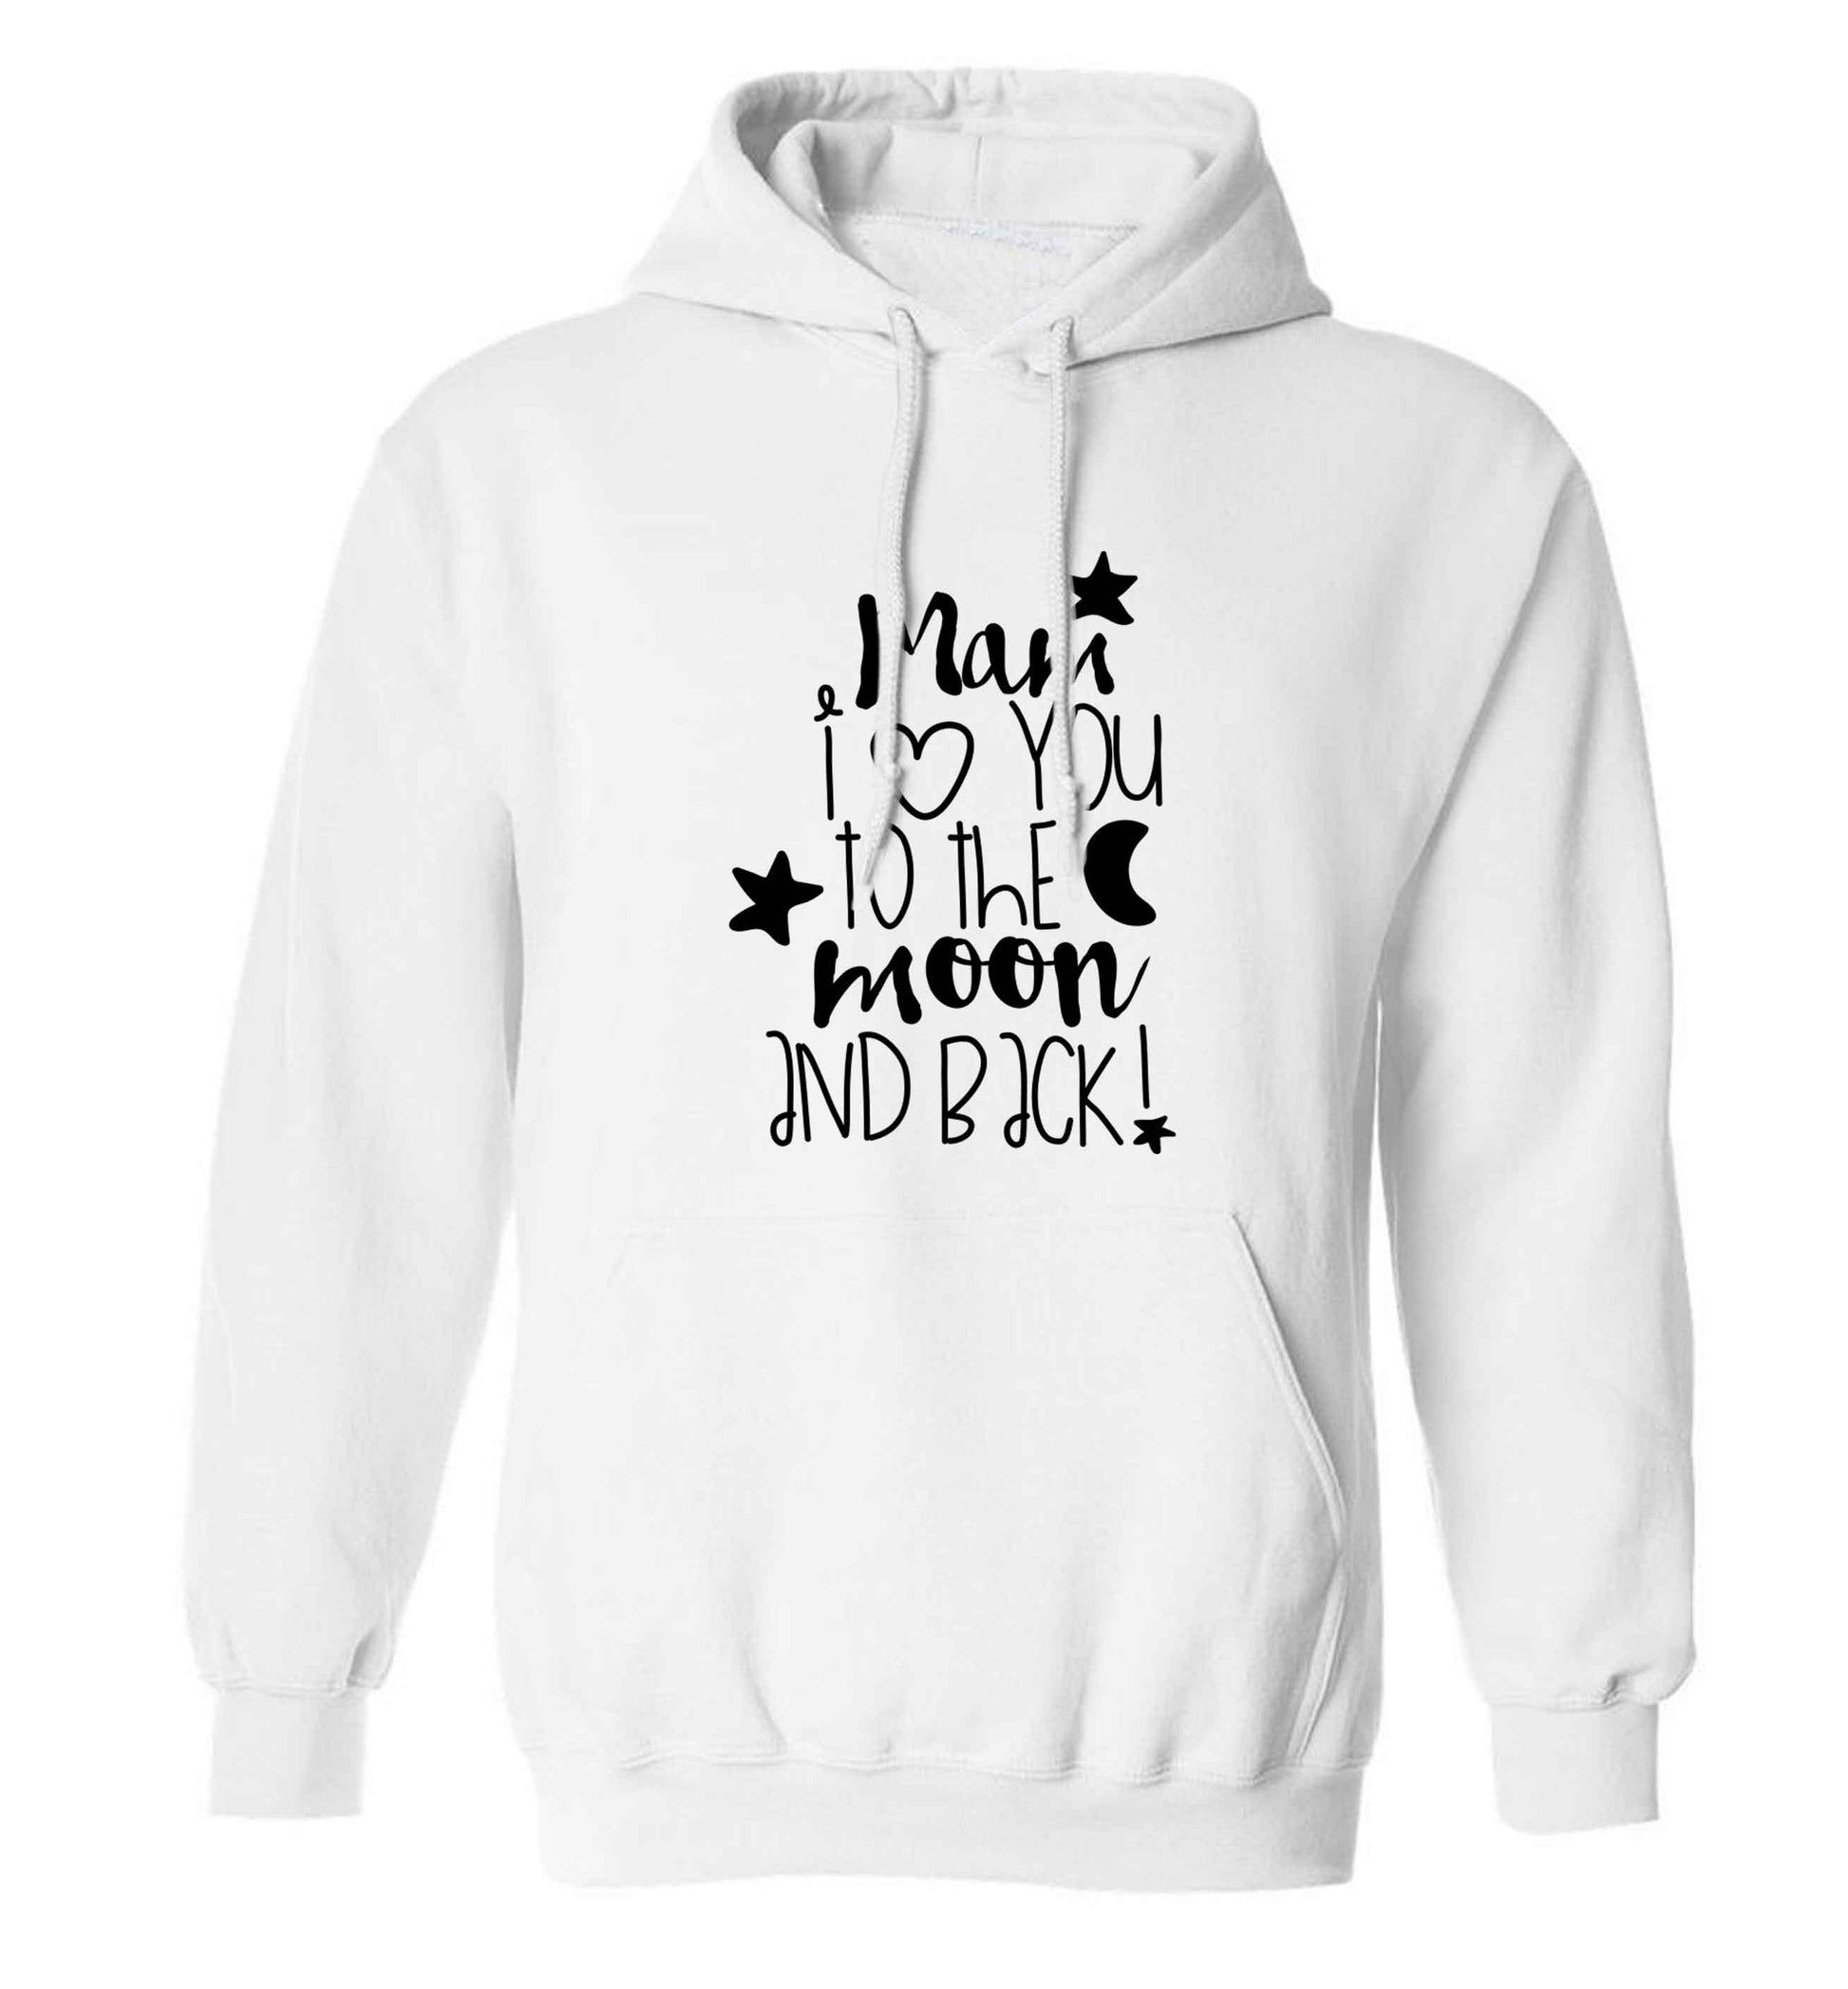 Mam I love you to the moon and back adults unisex white hoodie 2XL